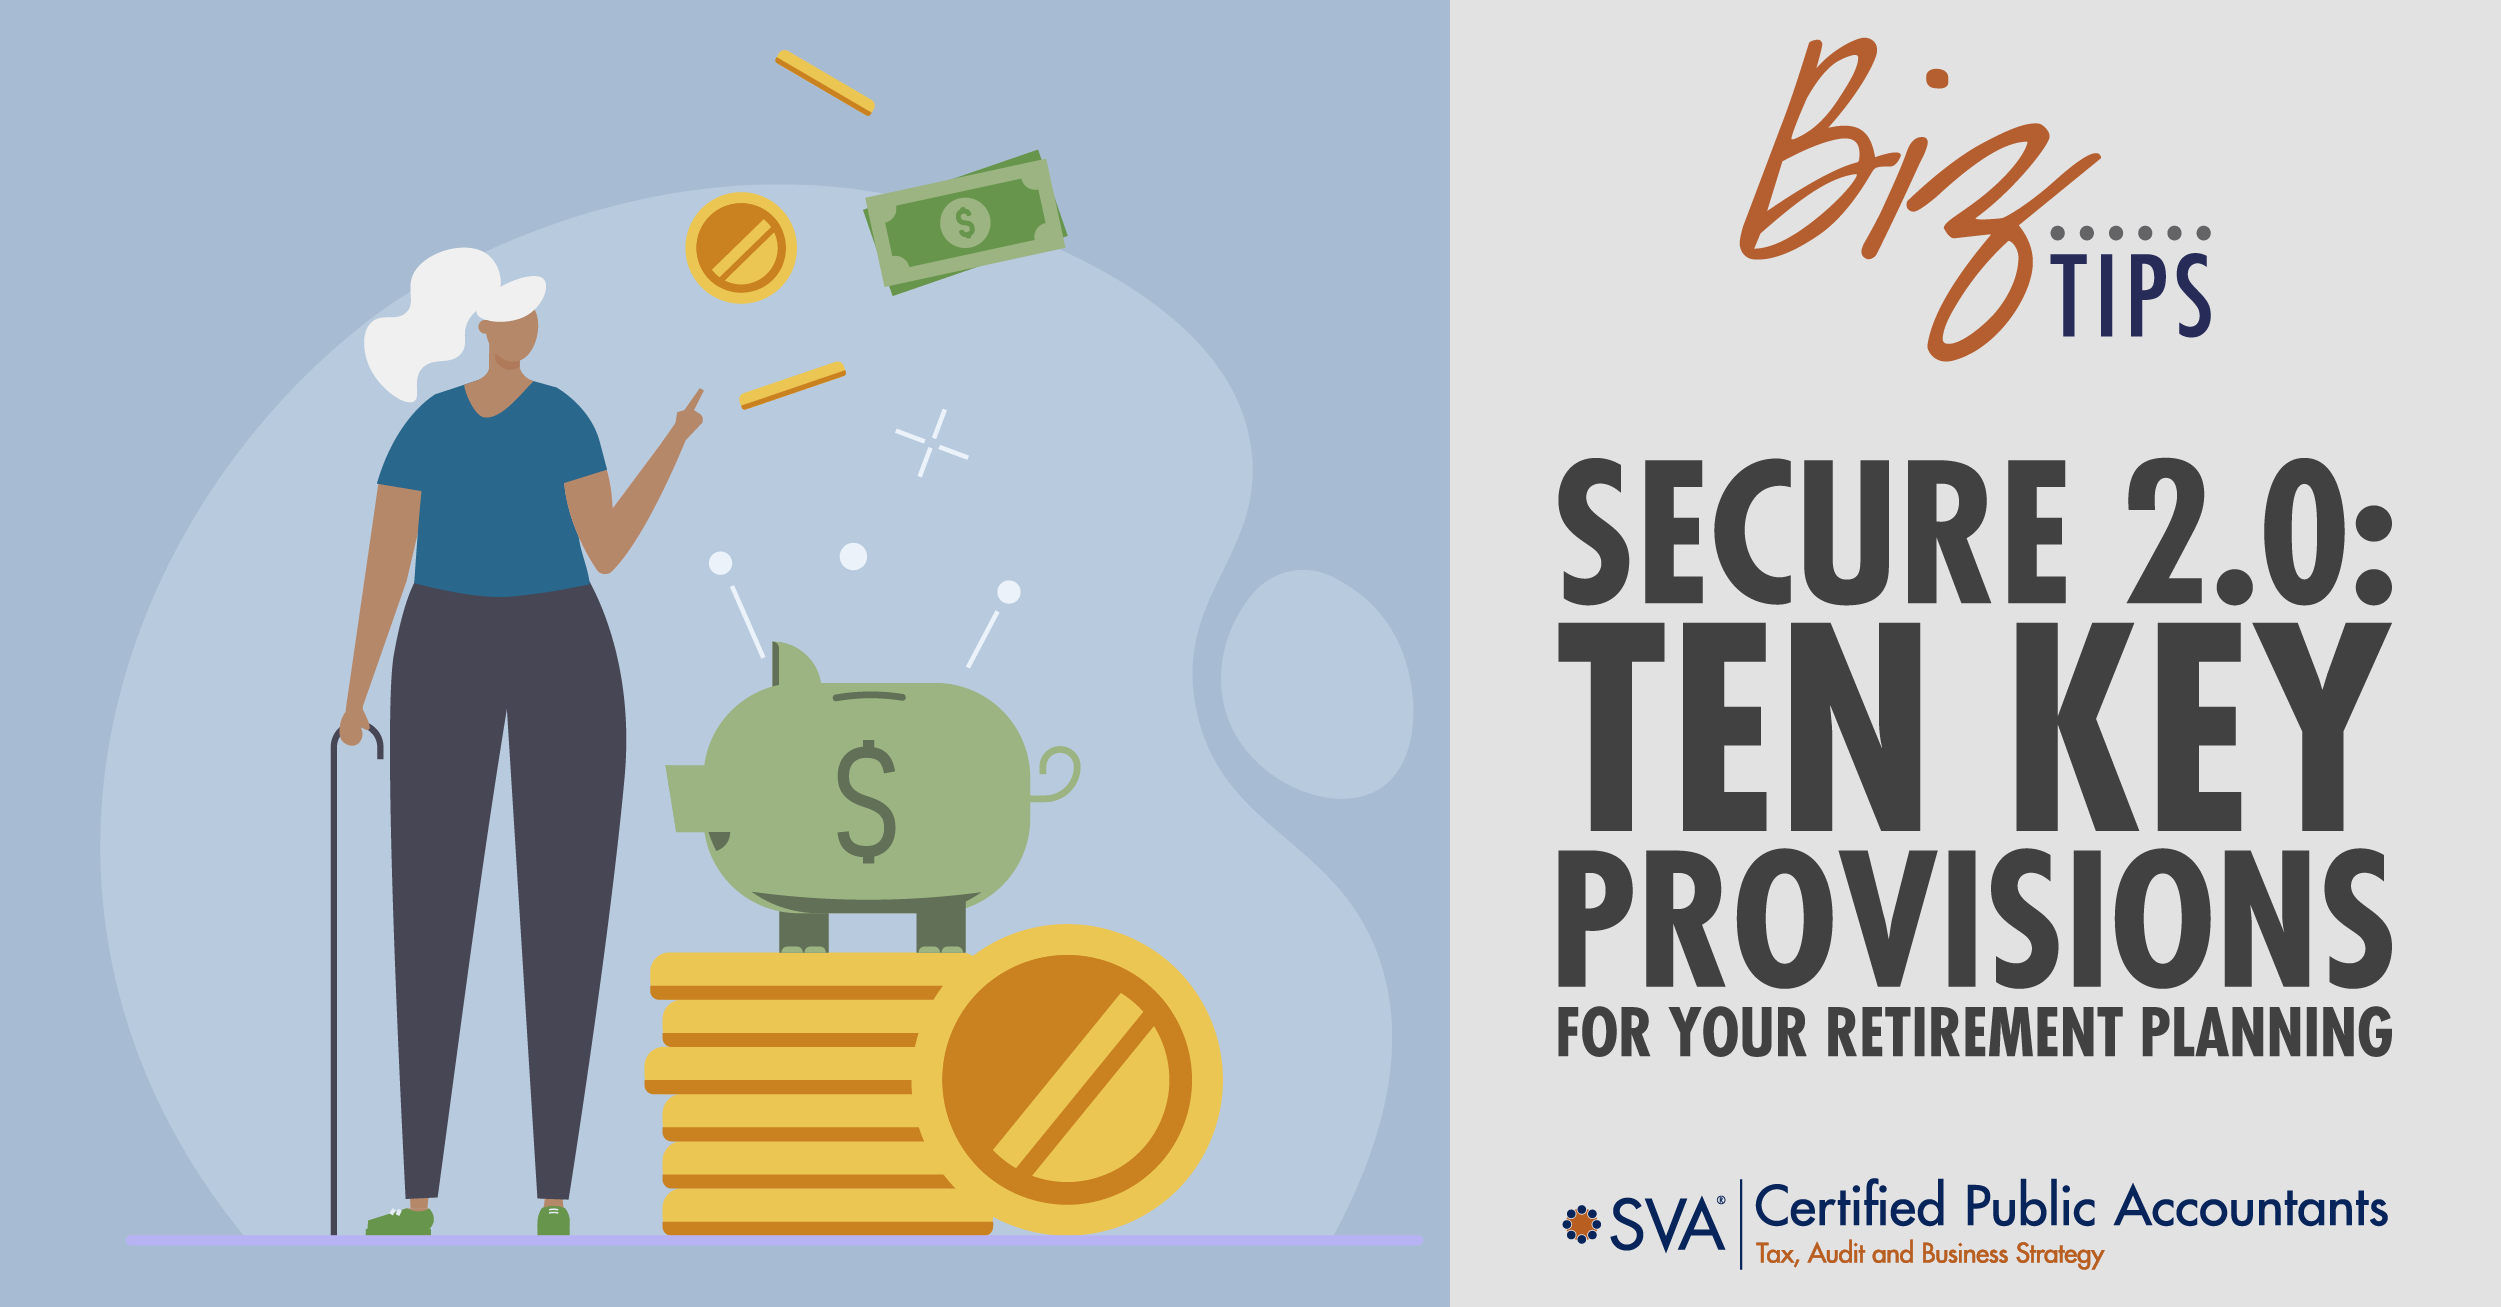 SECURE 2.0: Ten Key Provisions For Your Retirement Planning